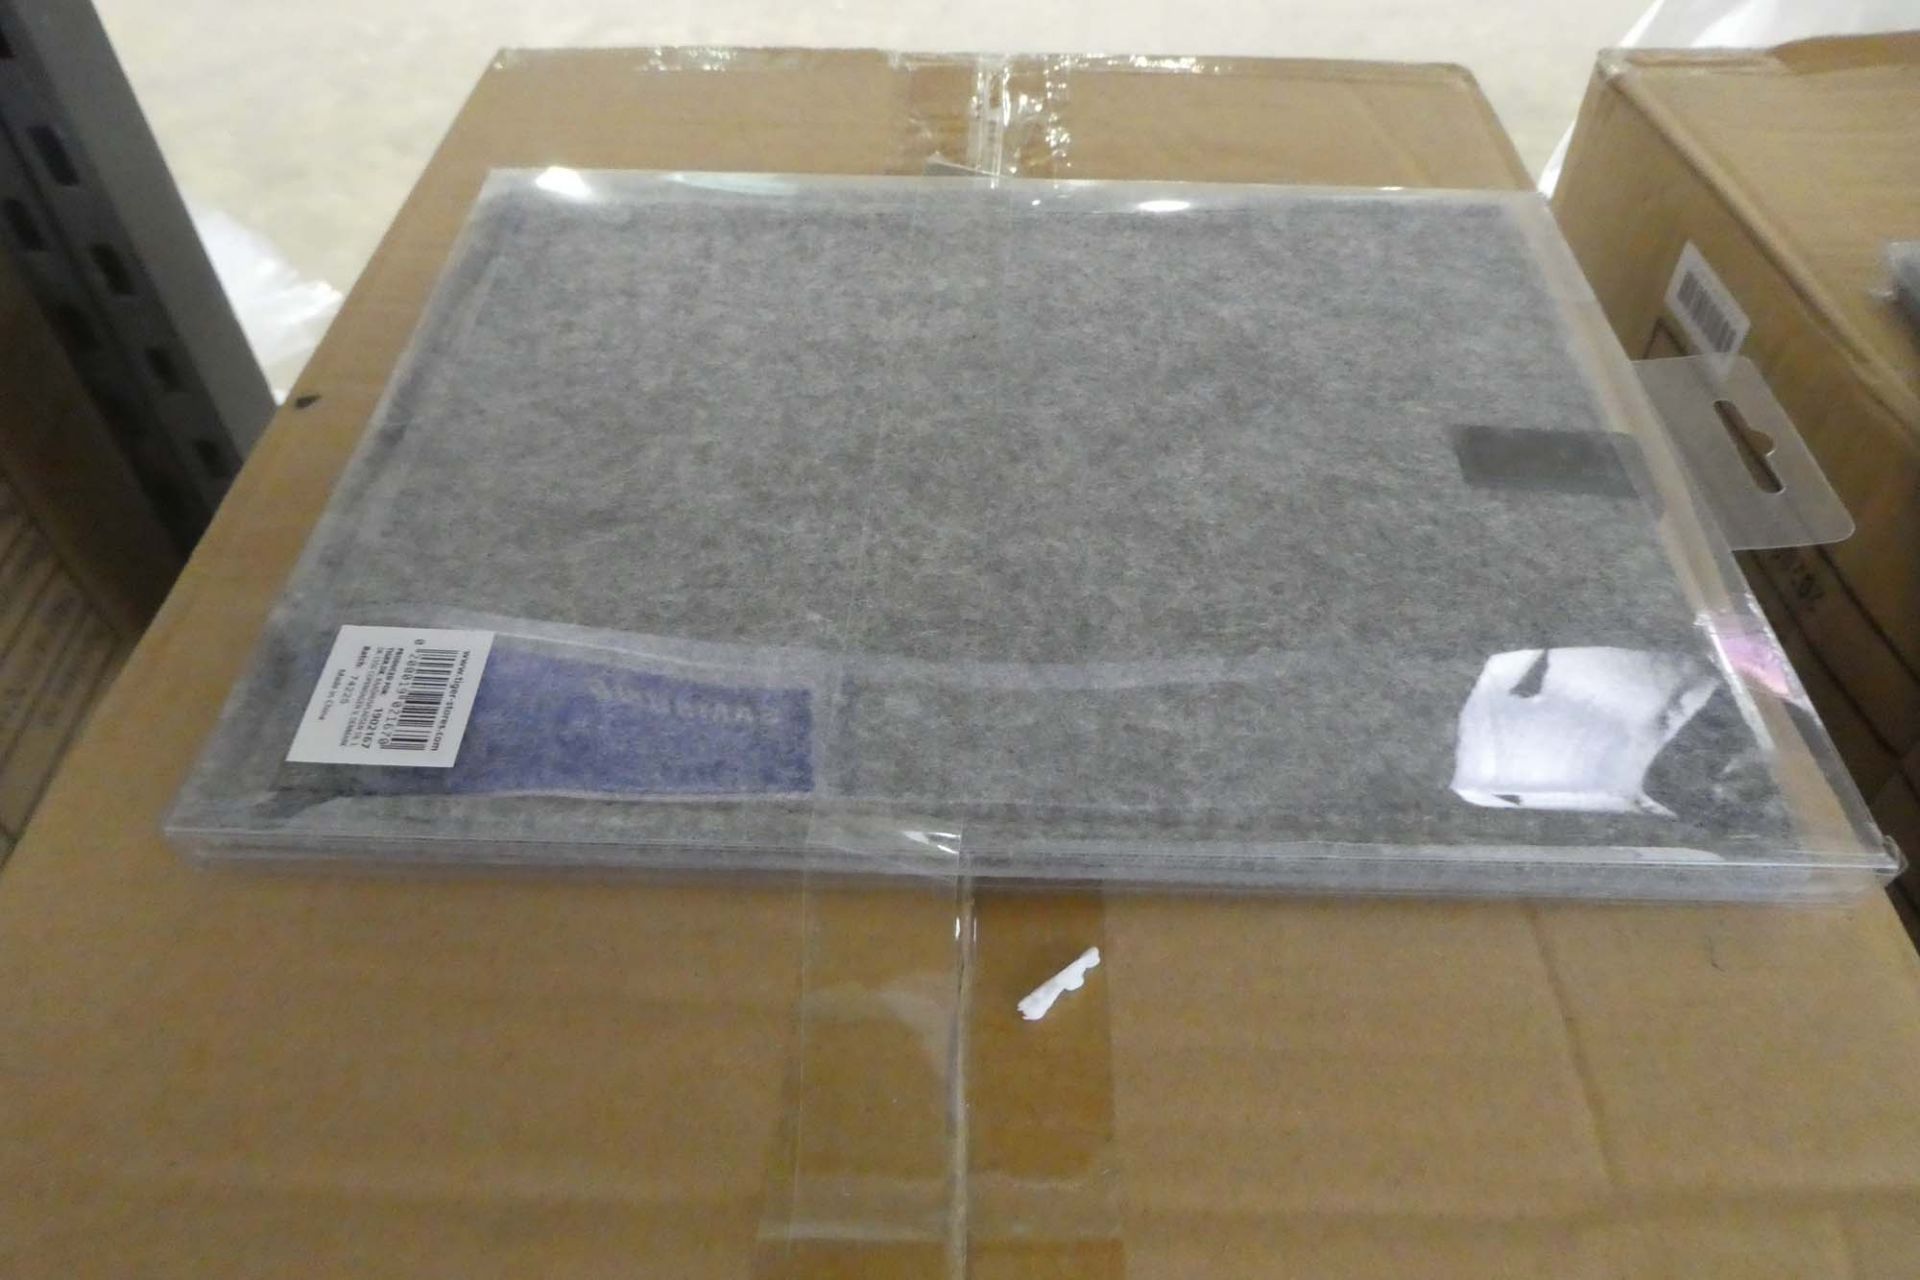 2 boxes containing in total approx 70 iPad and tablet covers